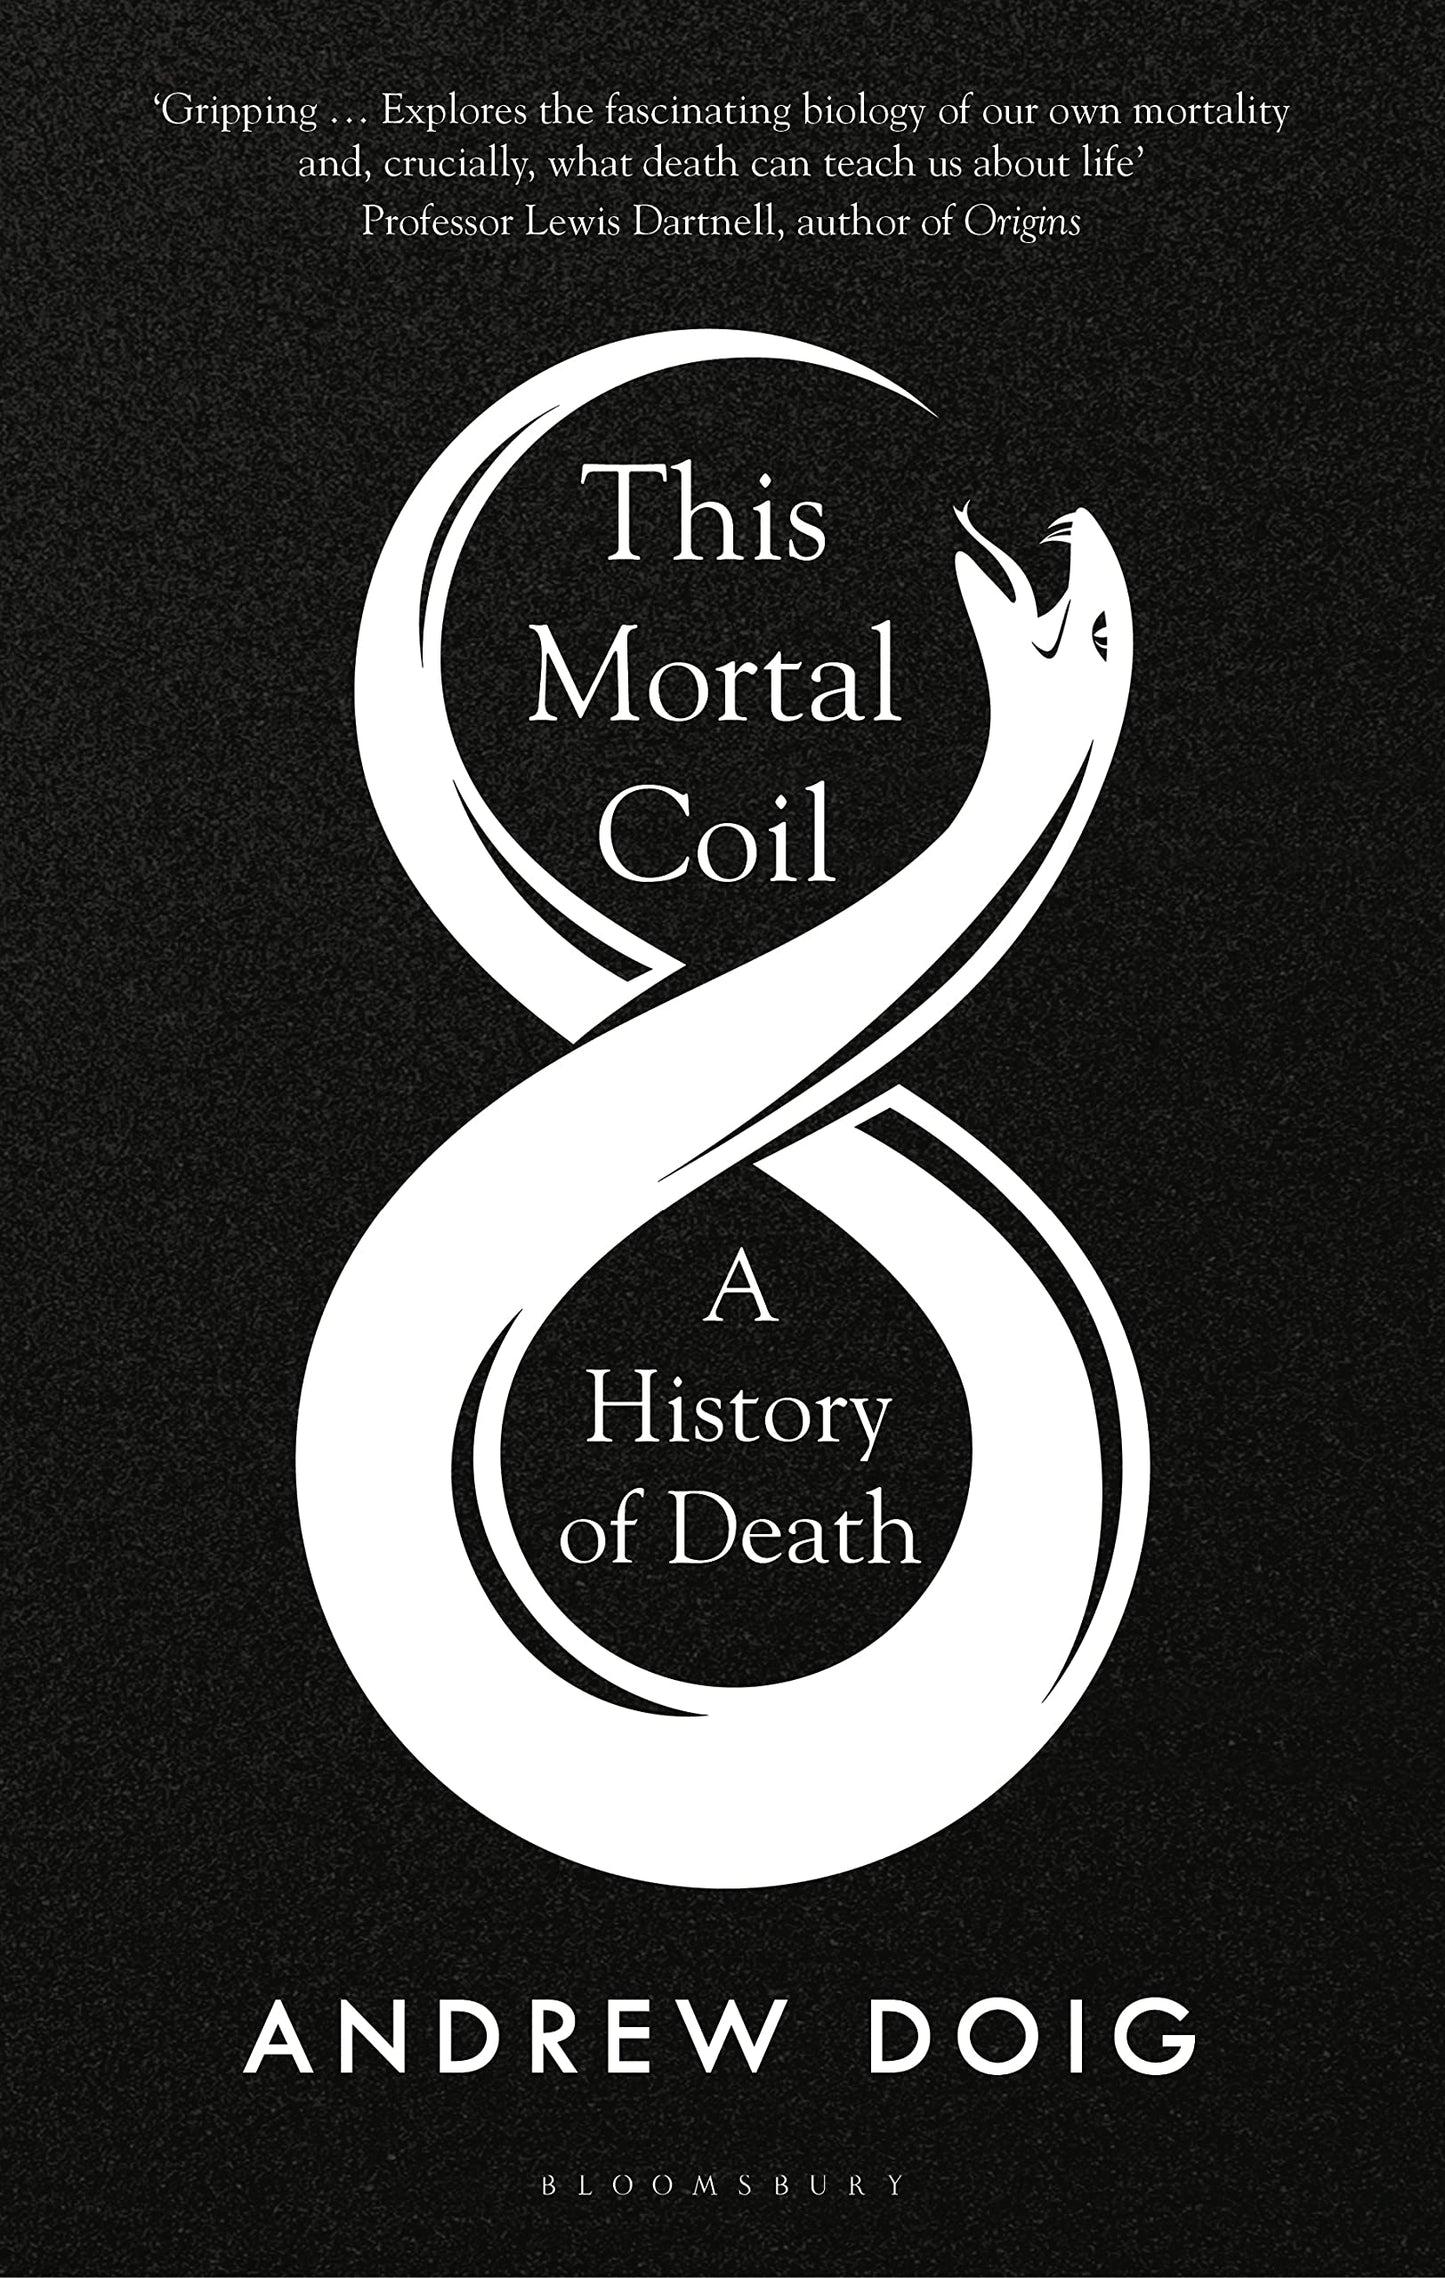 This Mortal Coil: A History of Death, by Andrew Doig